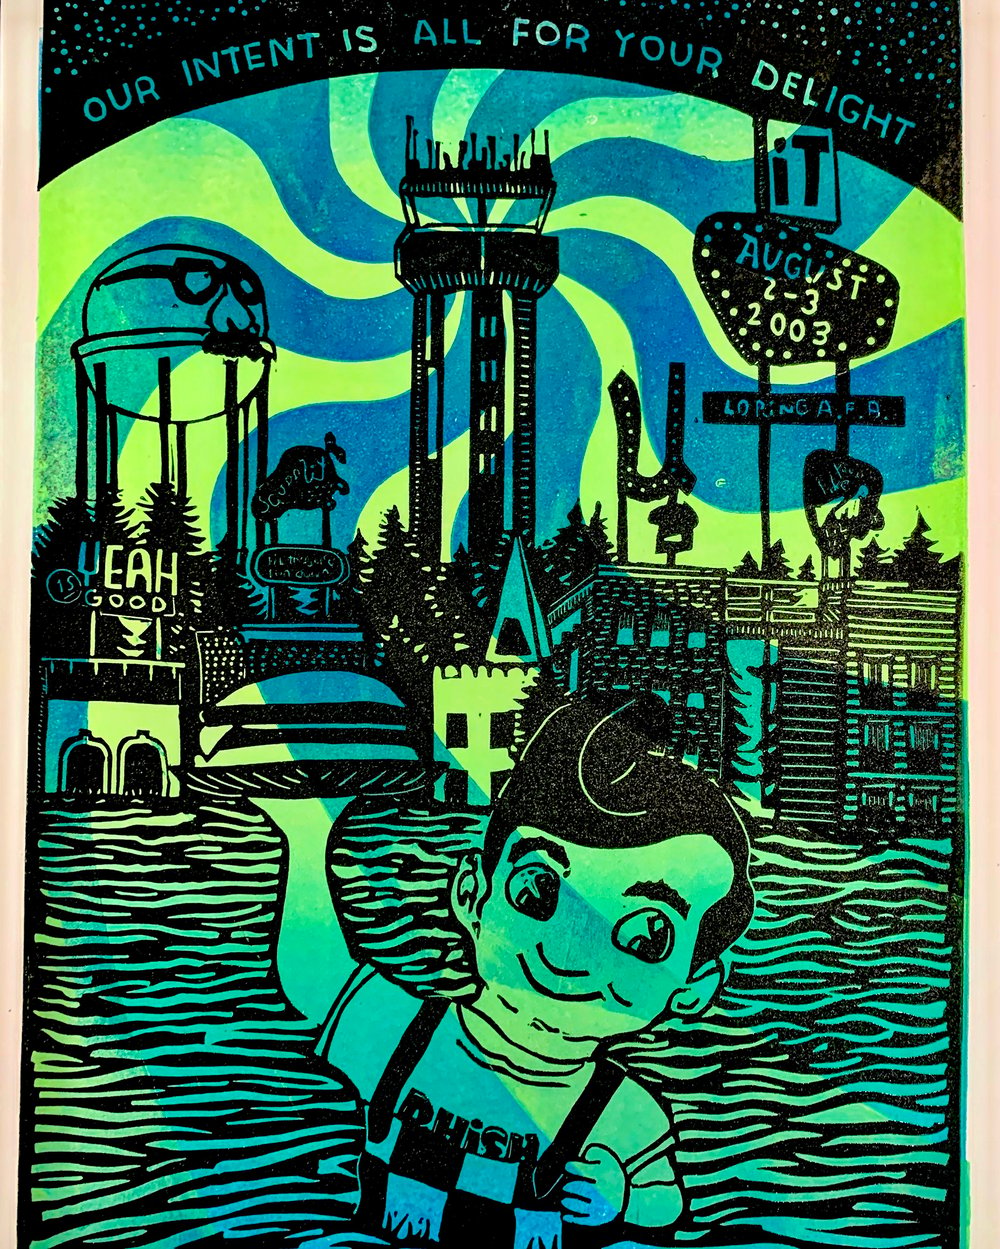 Phish IT Throwback Poster and Shirt Commission